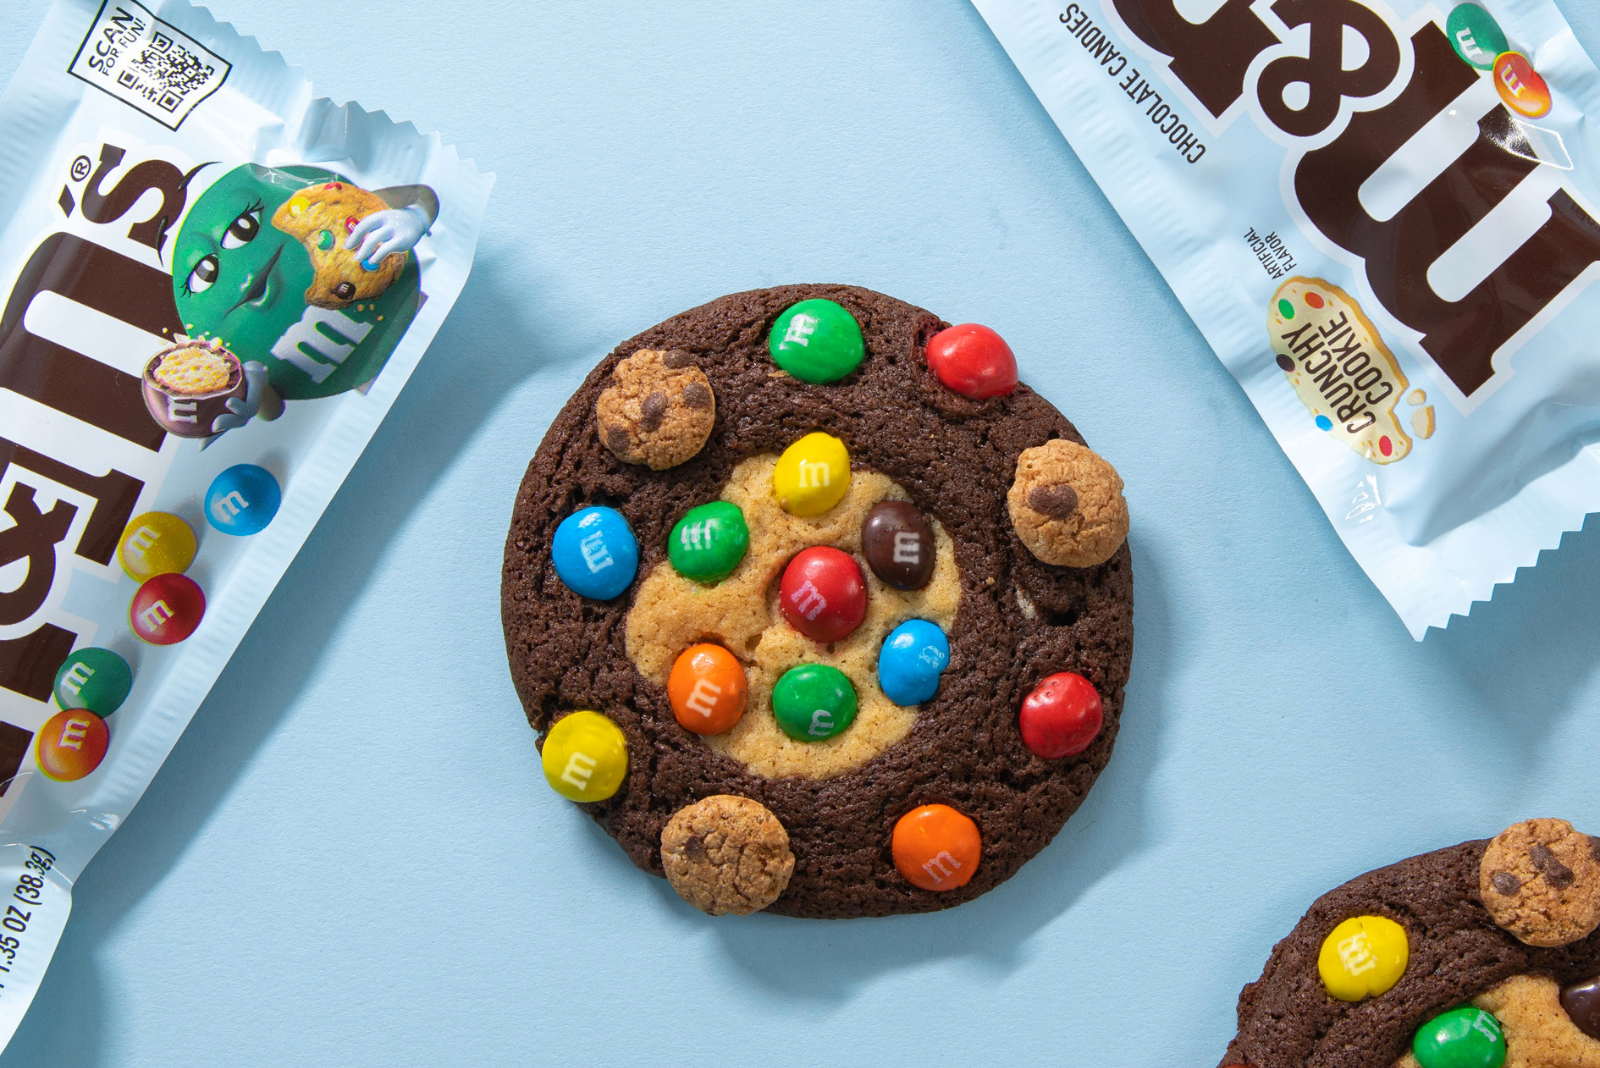 Mars teams up with Milk Bar's Christina Tosi to create limited-edition  cookies inspired by M&M'S Crunchy Cookie